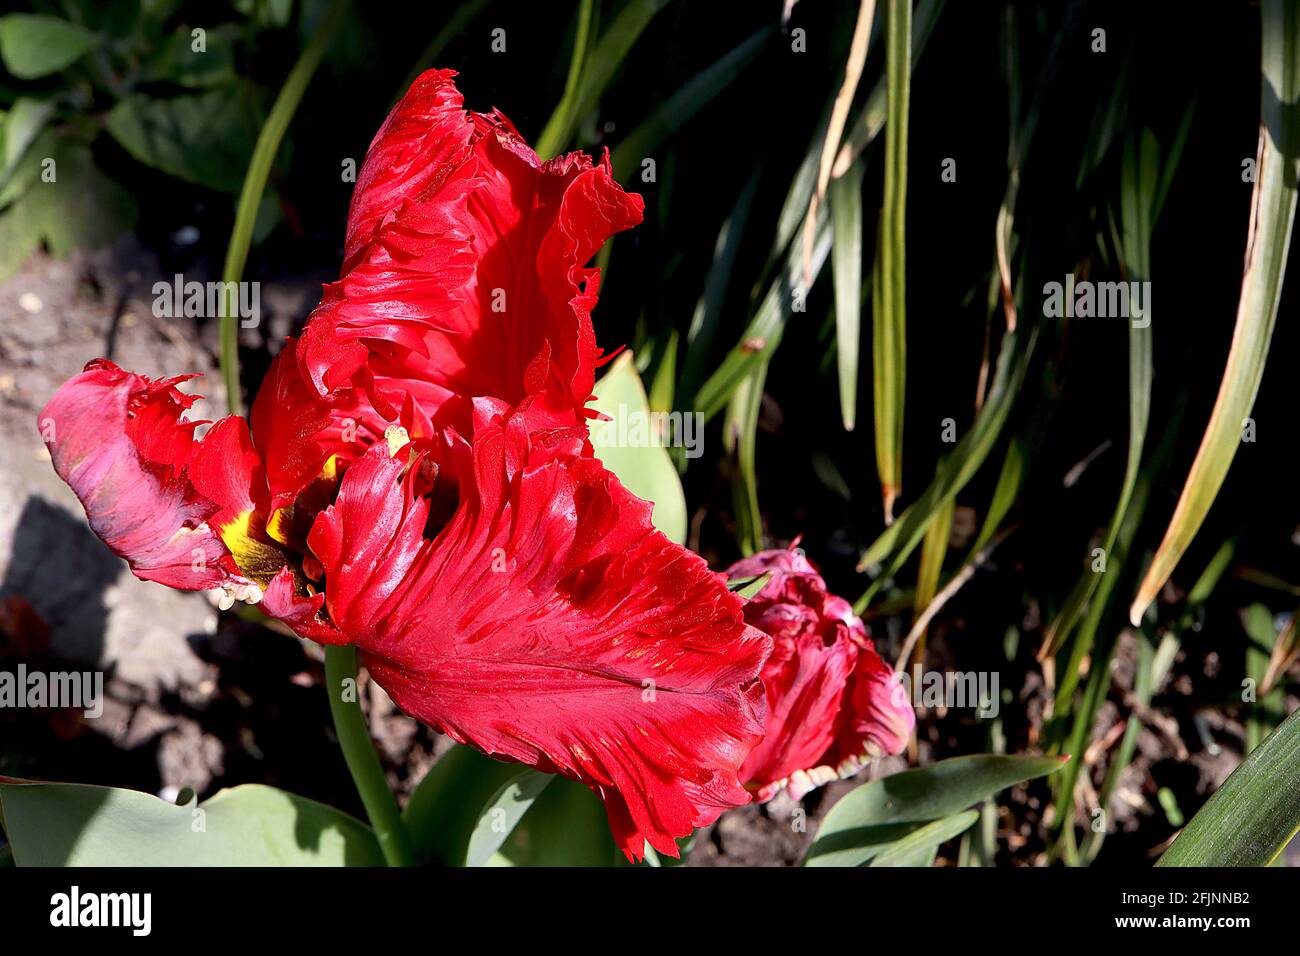 Tulipa gesneriana var dracontia ‘Red Parrot’  Parrot 10 Red Parrot tulip - twisted scarlet red petals, April, England, UK Stock Photo